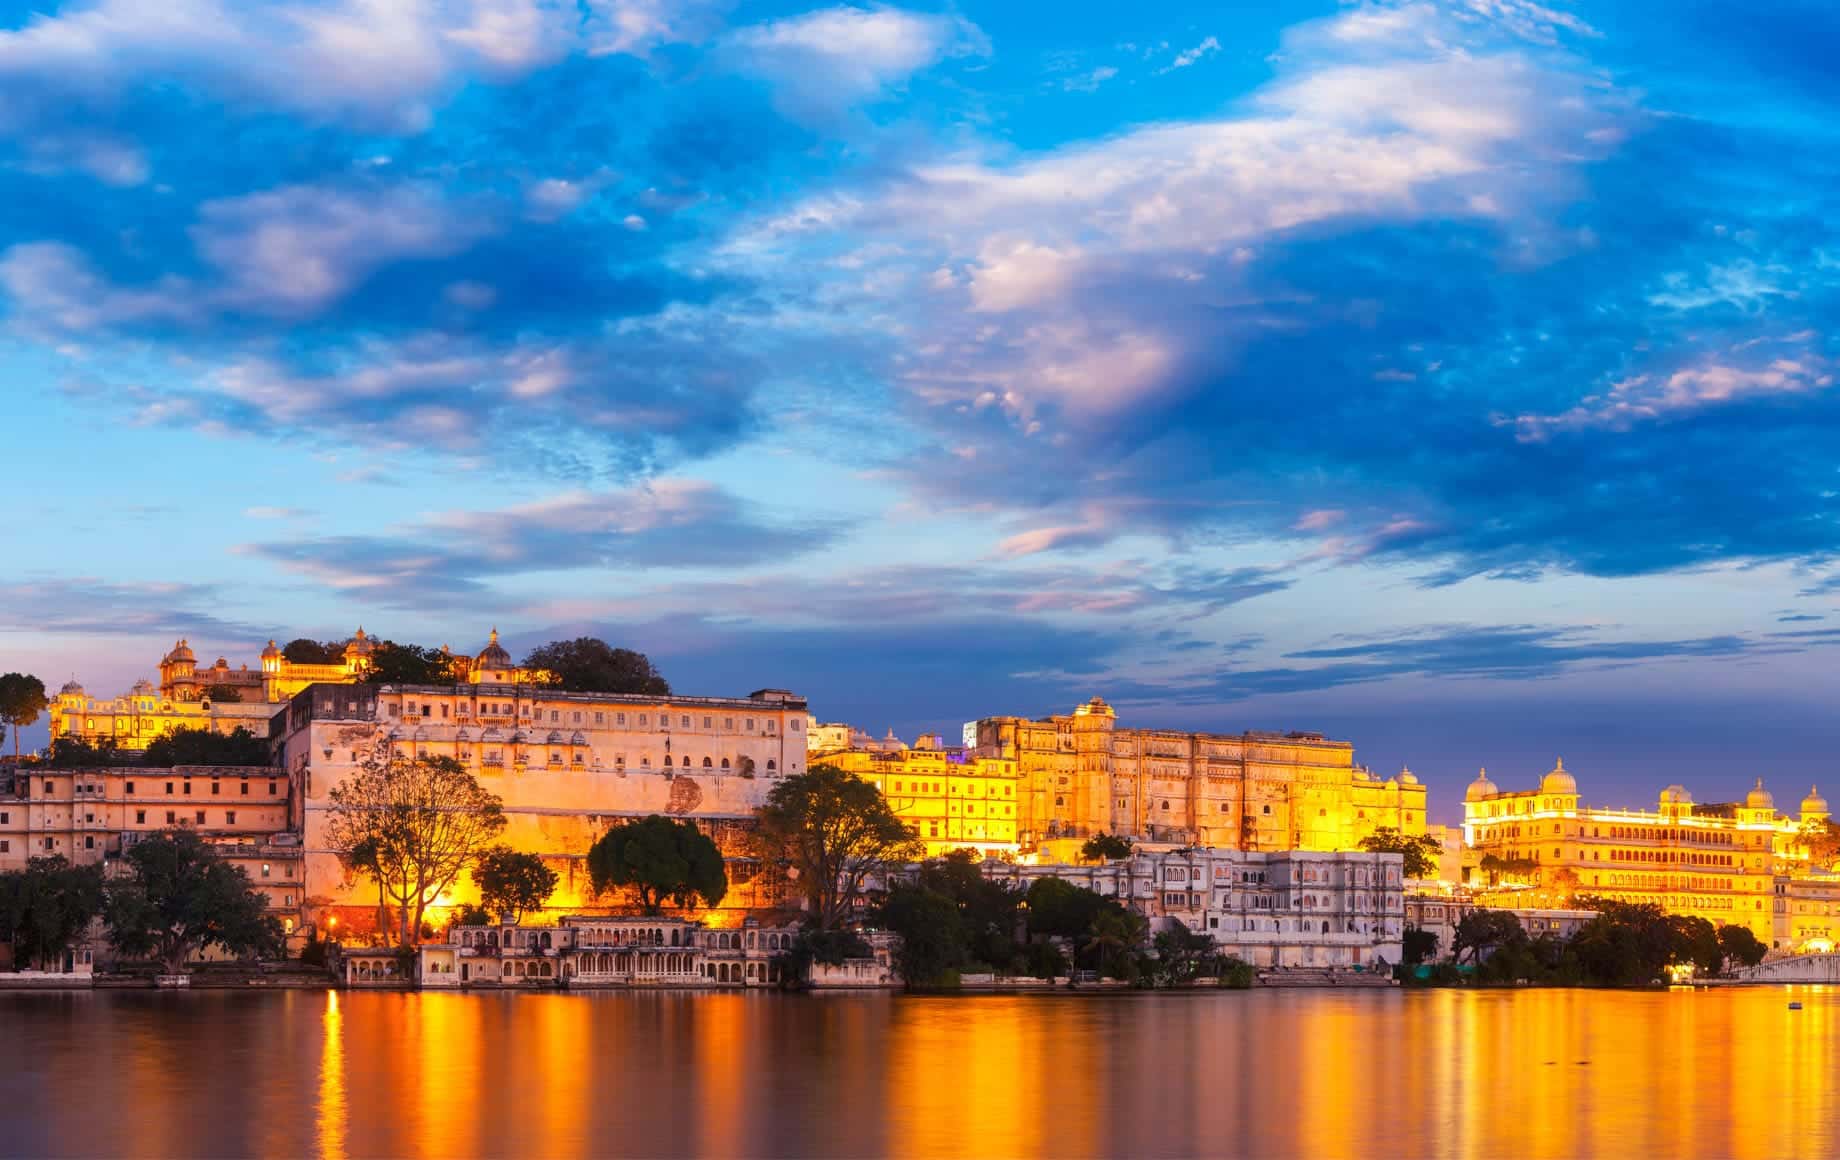 Evening Lake View of Udaipur